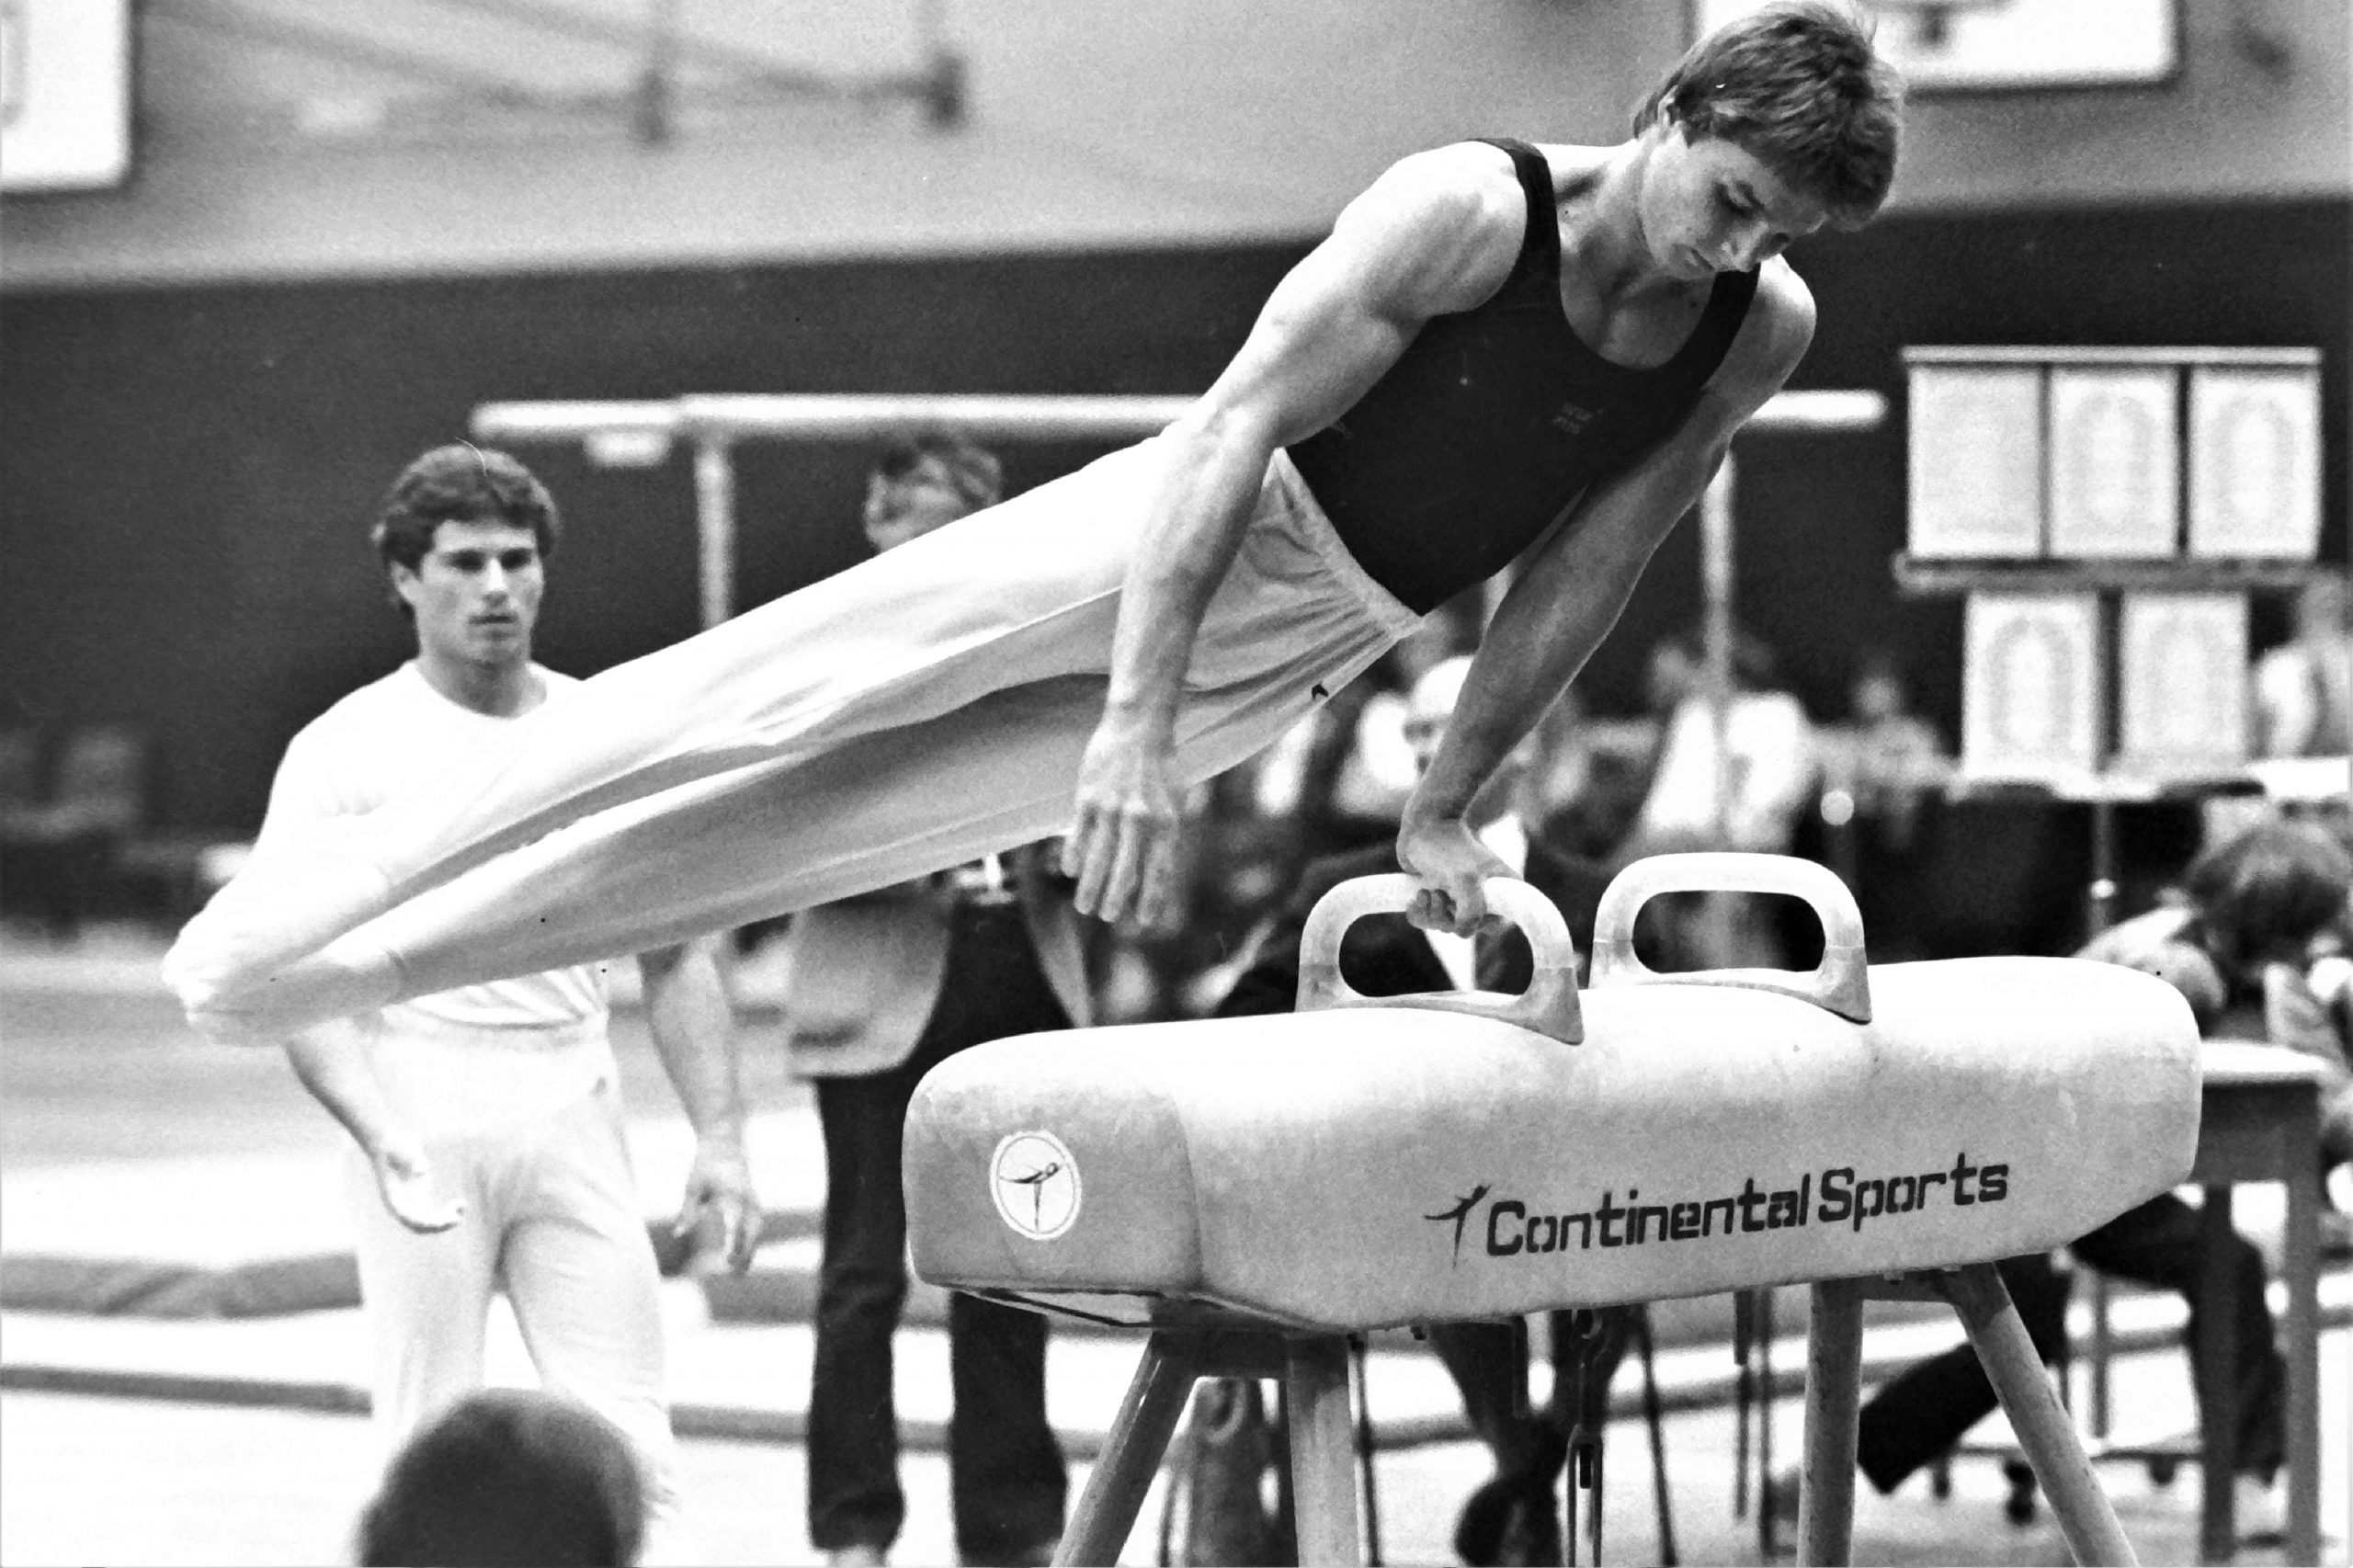 Langley Keith warming up on Pommel Horse with Andrew Morris looking on